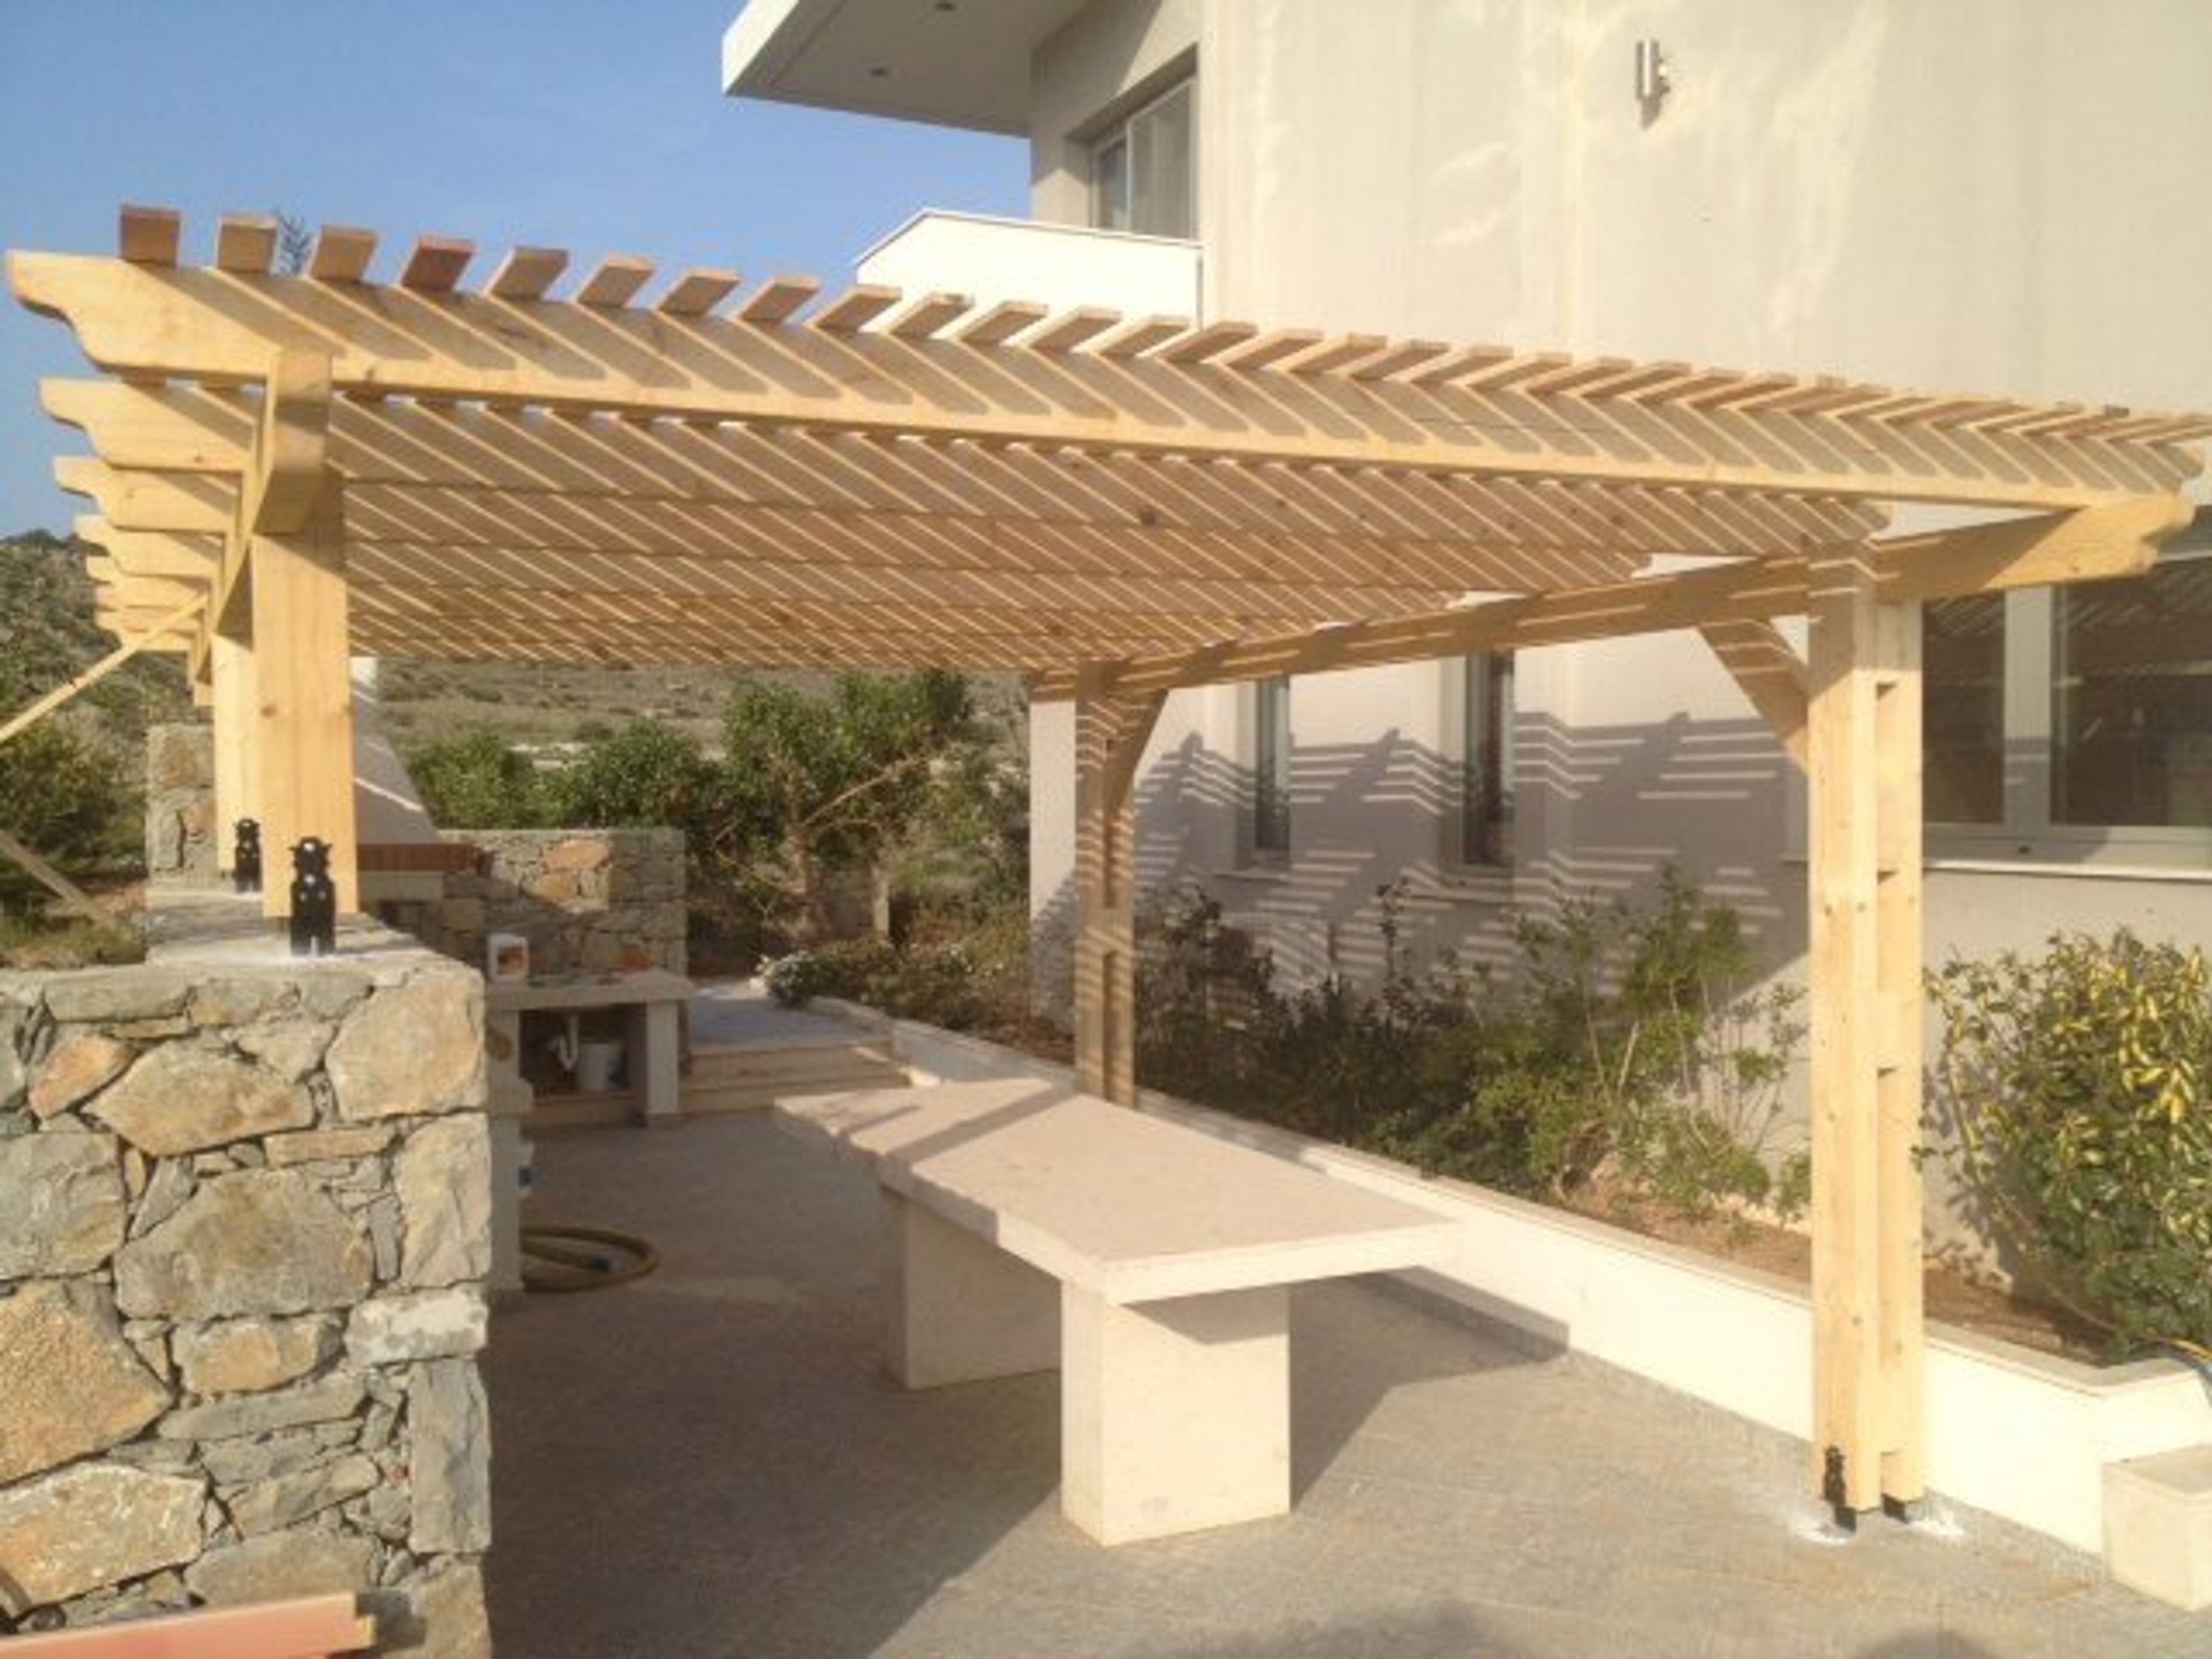 .. or outdoors under the pergola